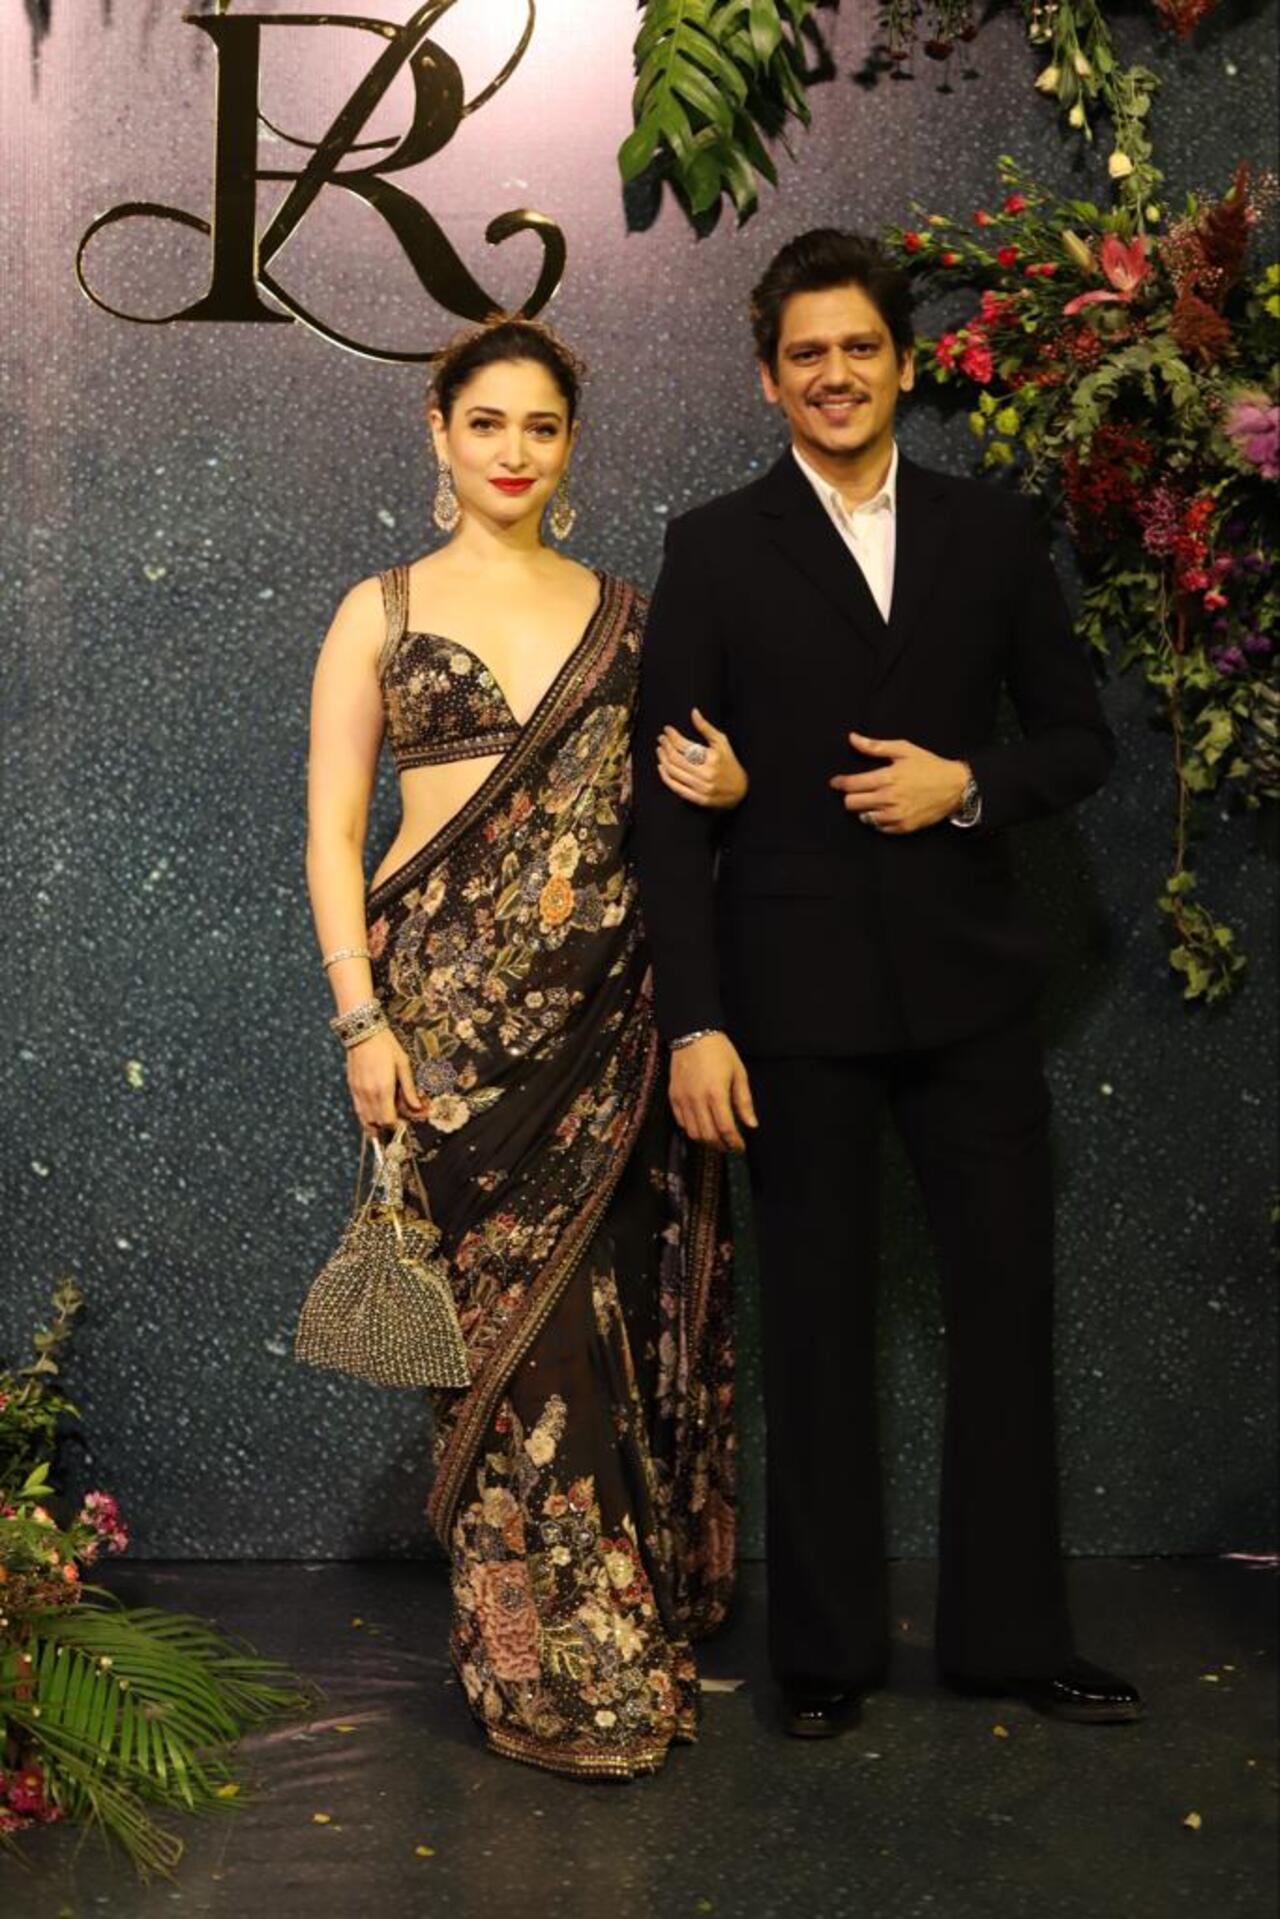 Lovebirds Tamannaah Bhatia and Vijay Varma also posed for the paparazzi as they attended the reception party of Randeep and Lin (Pic/Pallav Paliwal)